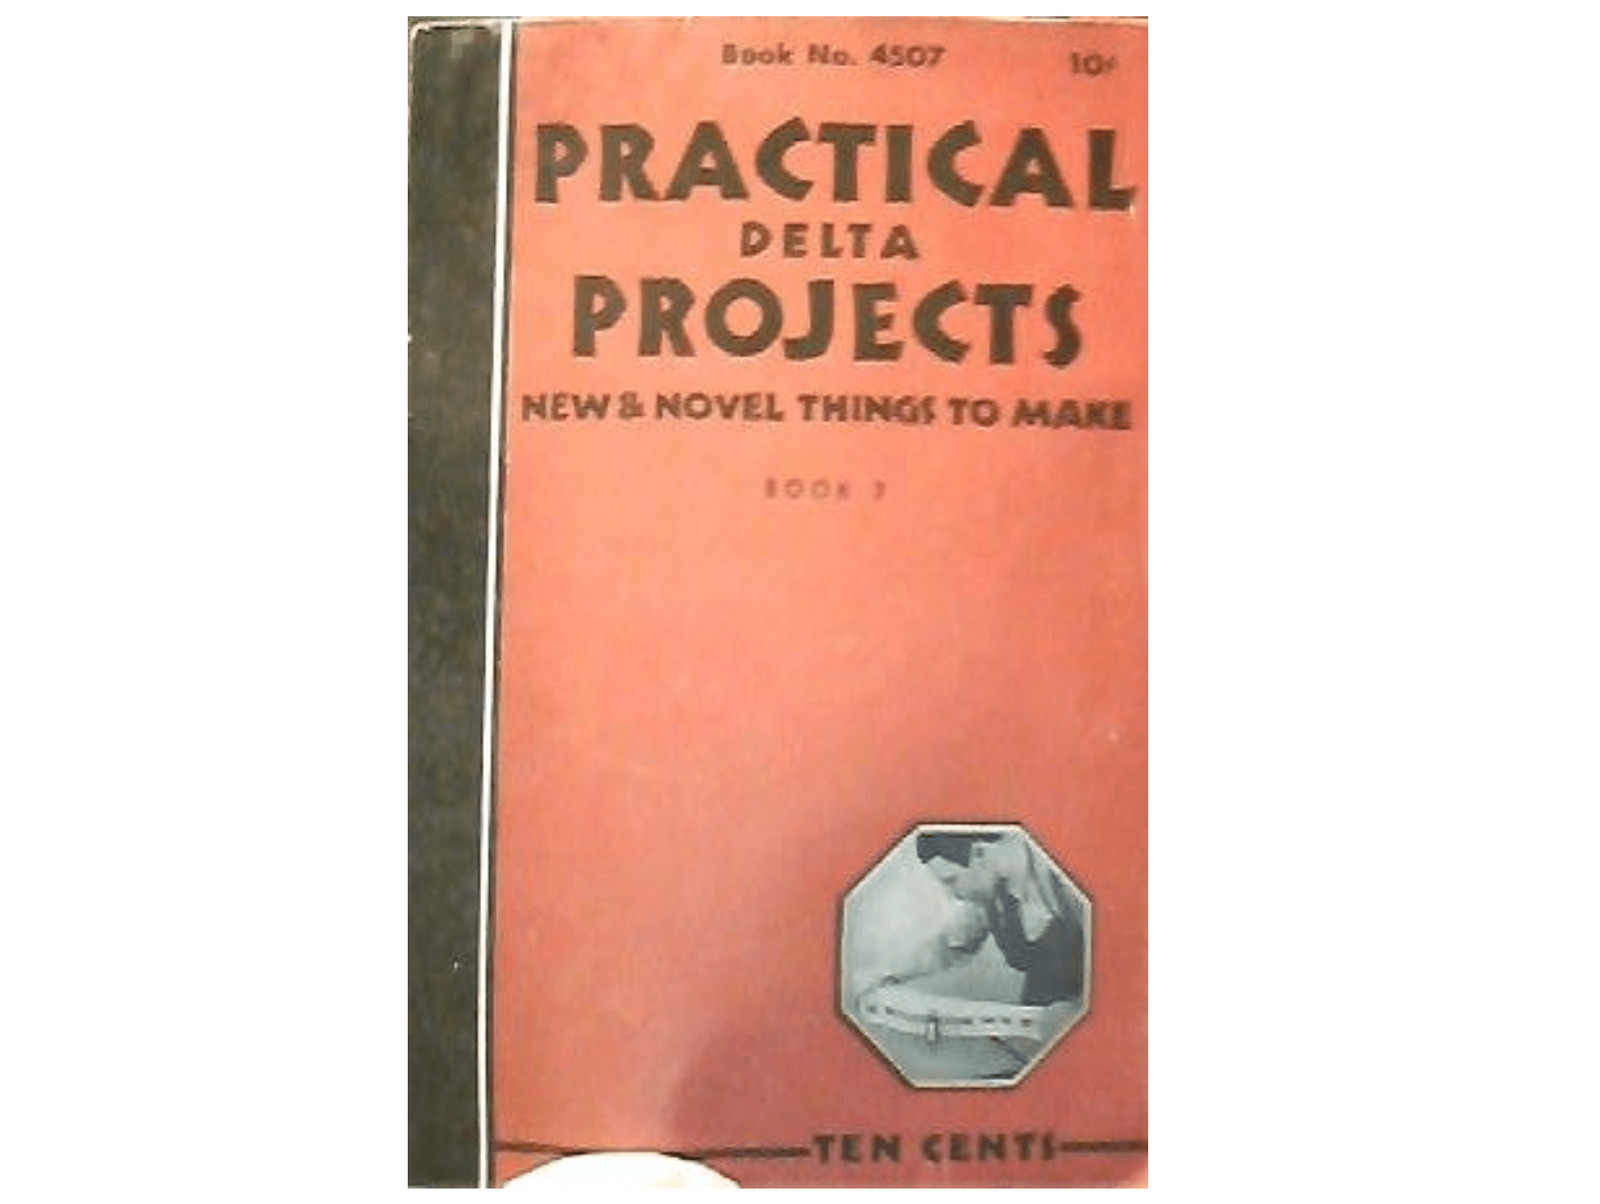 Practical Delta Projects, New and Novel Things to Make Book No. 4507 (Practic...